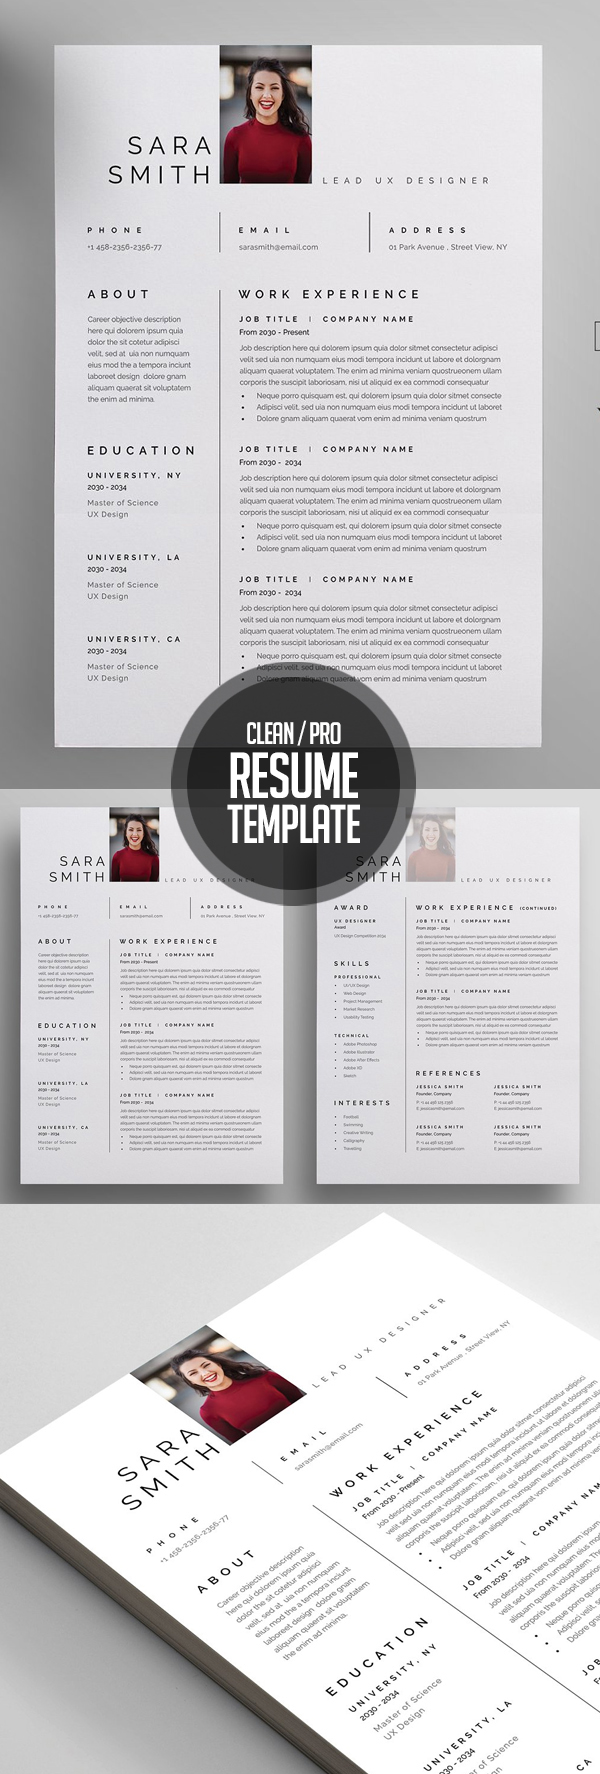 Clean and Professional Resume Design & Cover Letter